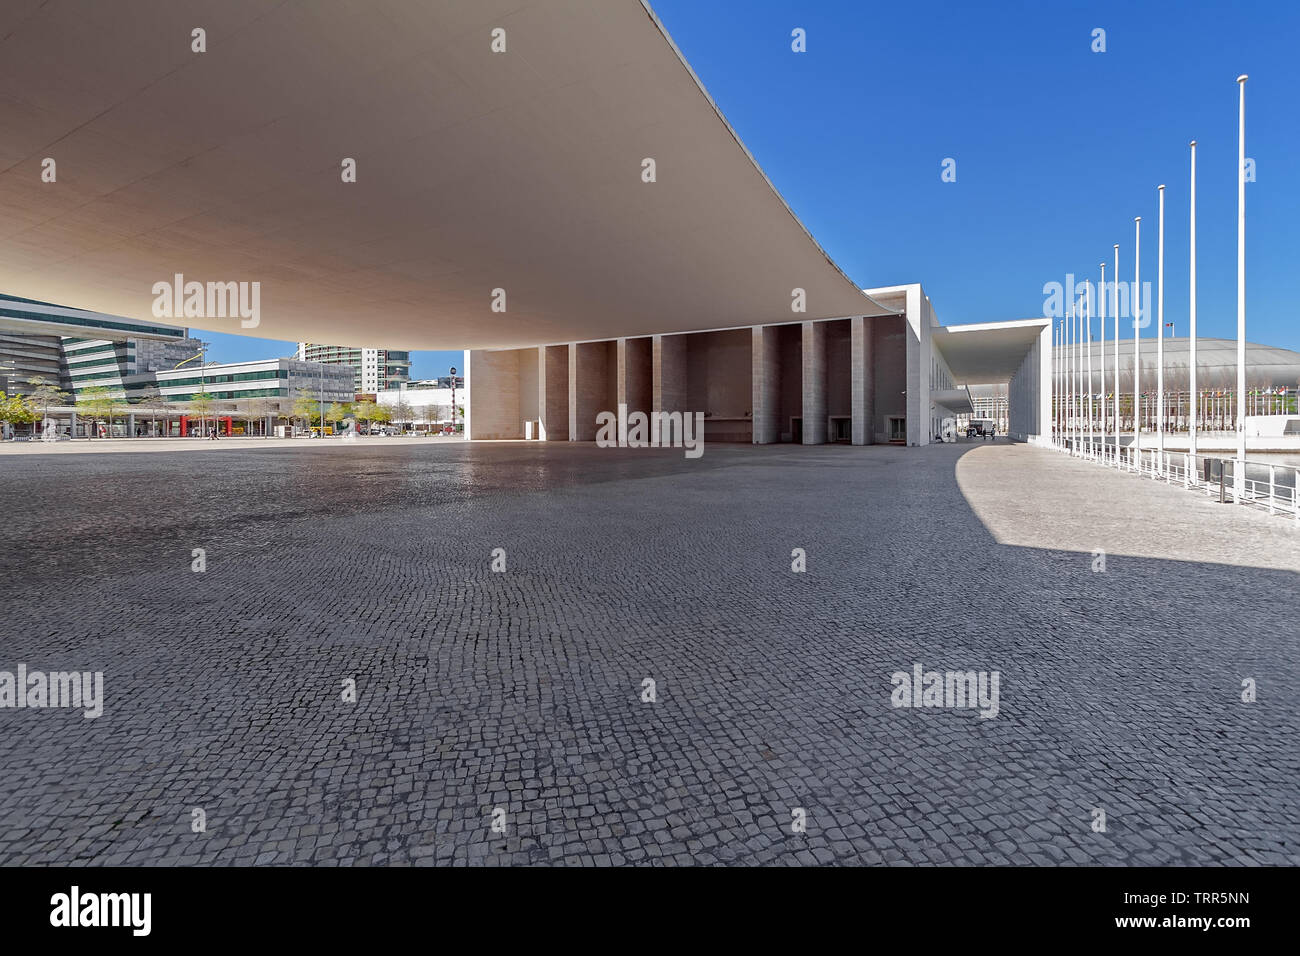 Lisbon, Portugal. Plaza under the canopy of Pavilhao de Portugal or Portuguese Pavilion. Parque das Nacoes or Park of Nations. By Alvaro Siza Vieira Stock Photo